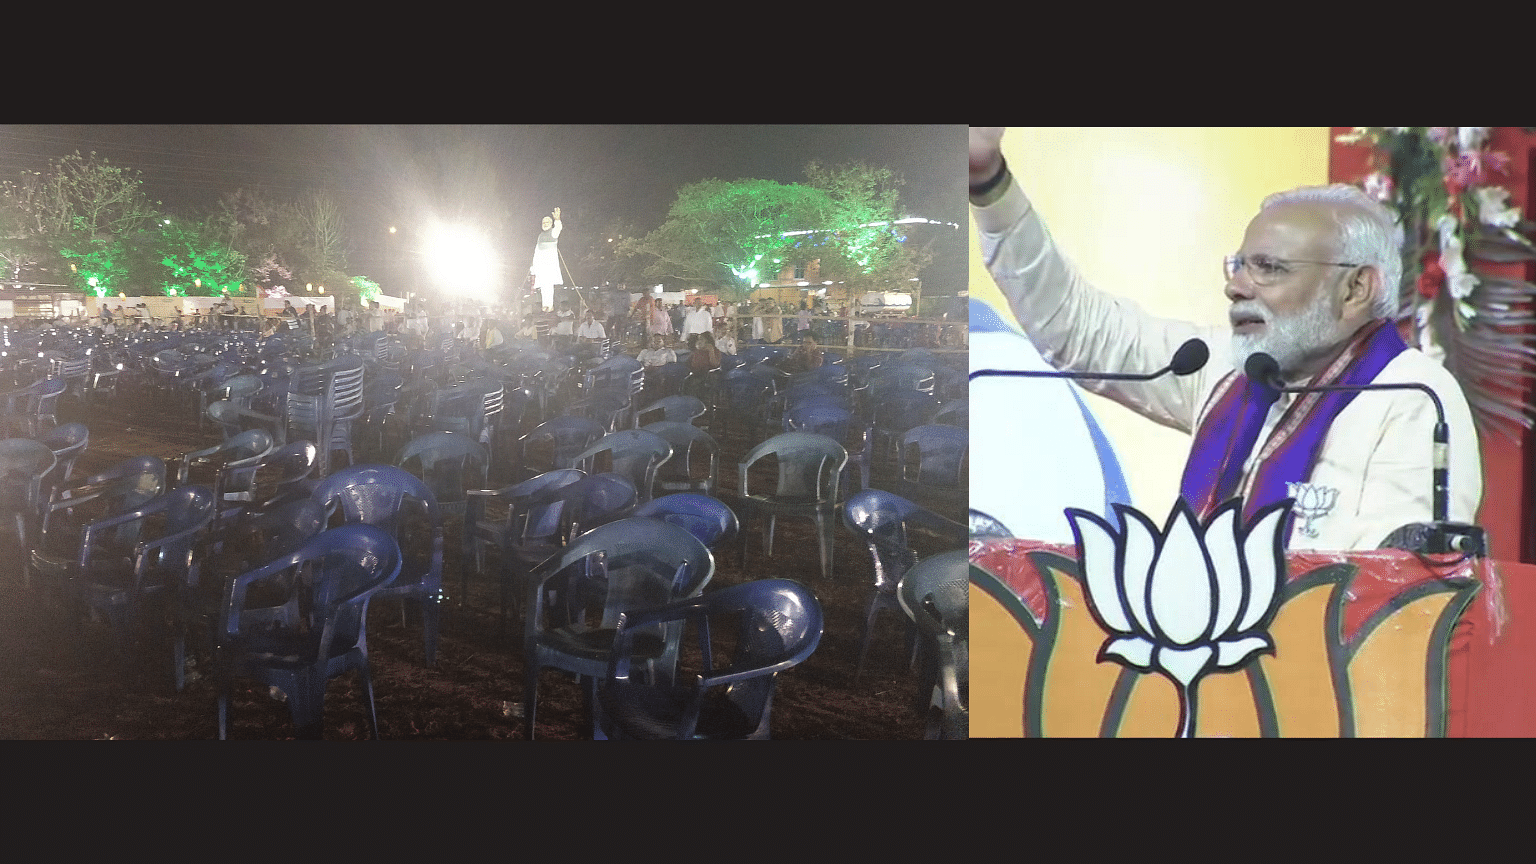 The lukewarm response at Modi’s rally in Bhubaneswar should be a sign of worry for the BJP in Odisha.